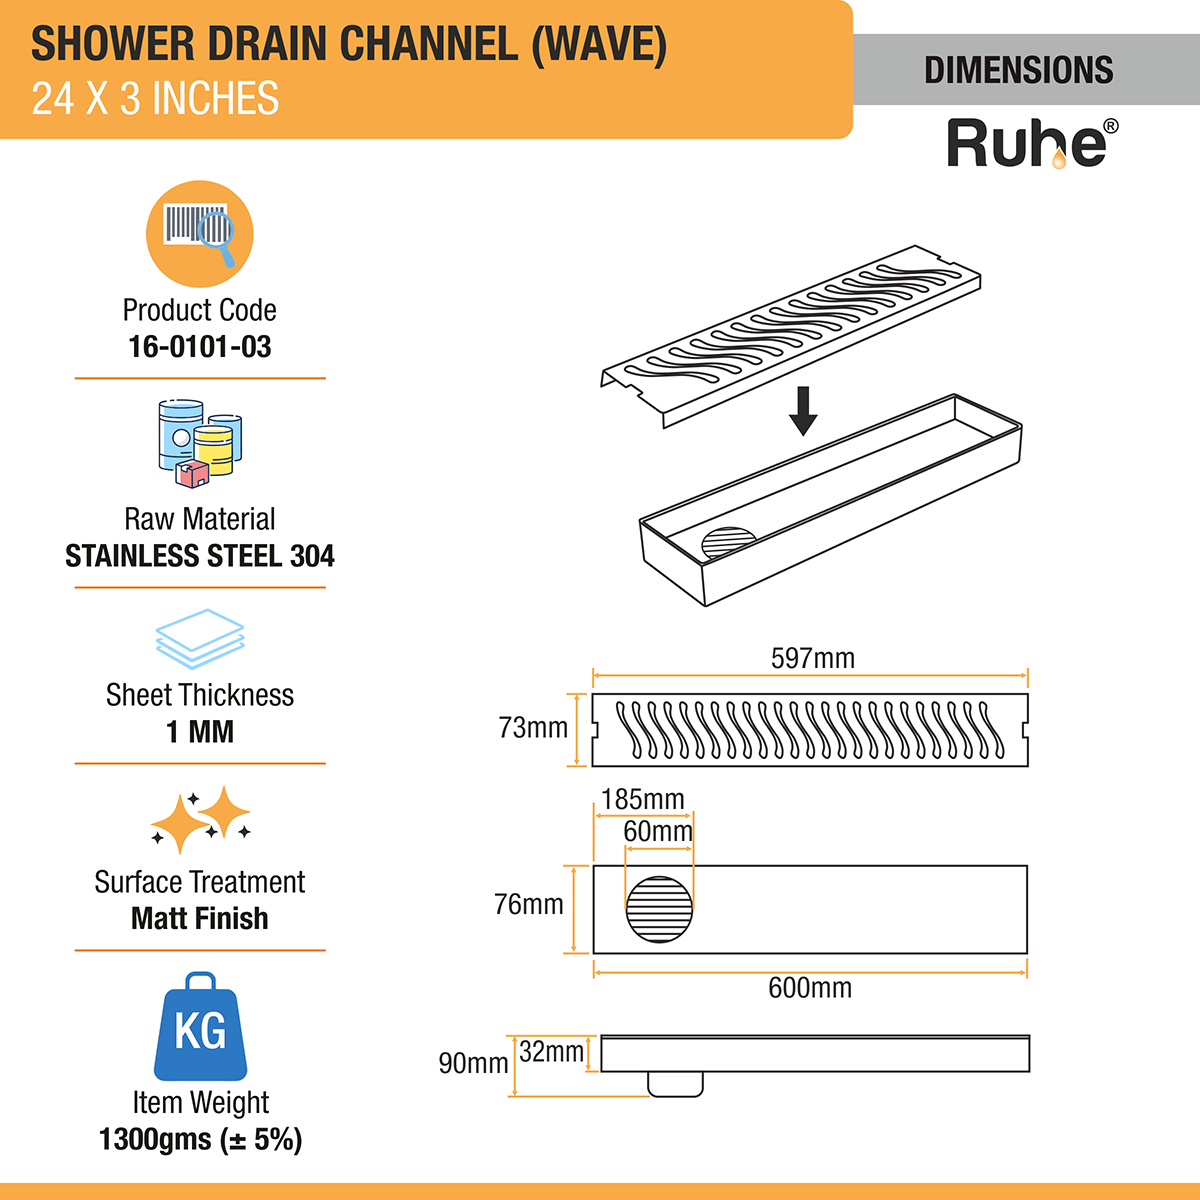 Wave Shower Drain Channel (24 X 3 Inches) with Cockroach Trap (304 Grade) dimensions and size